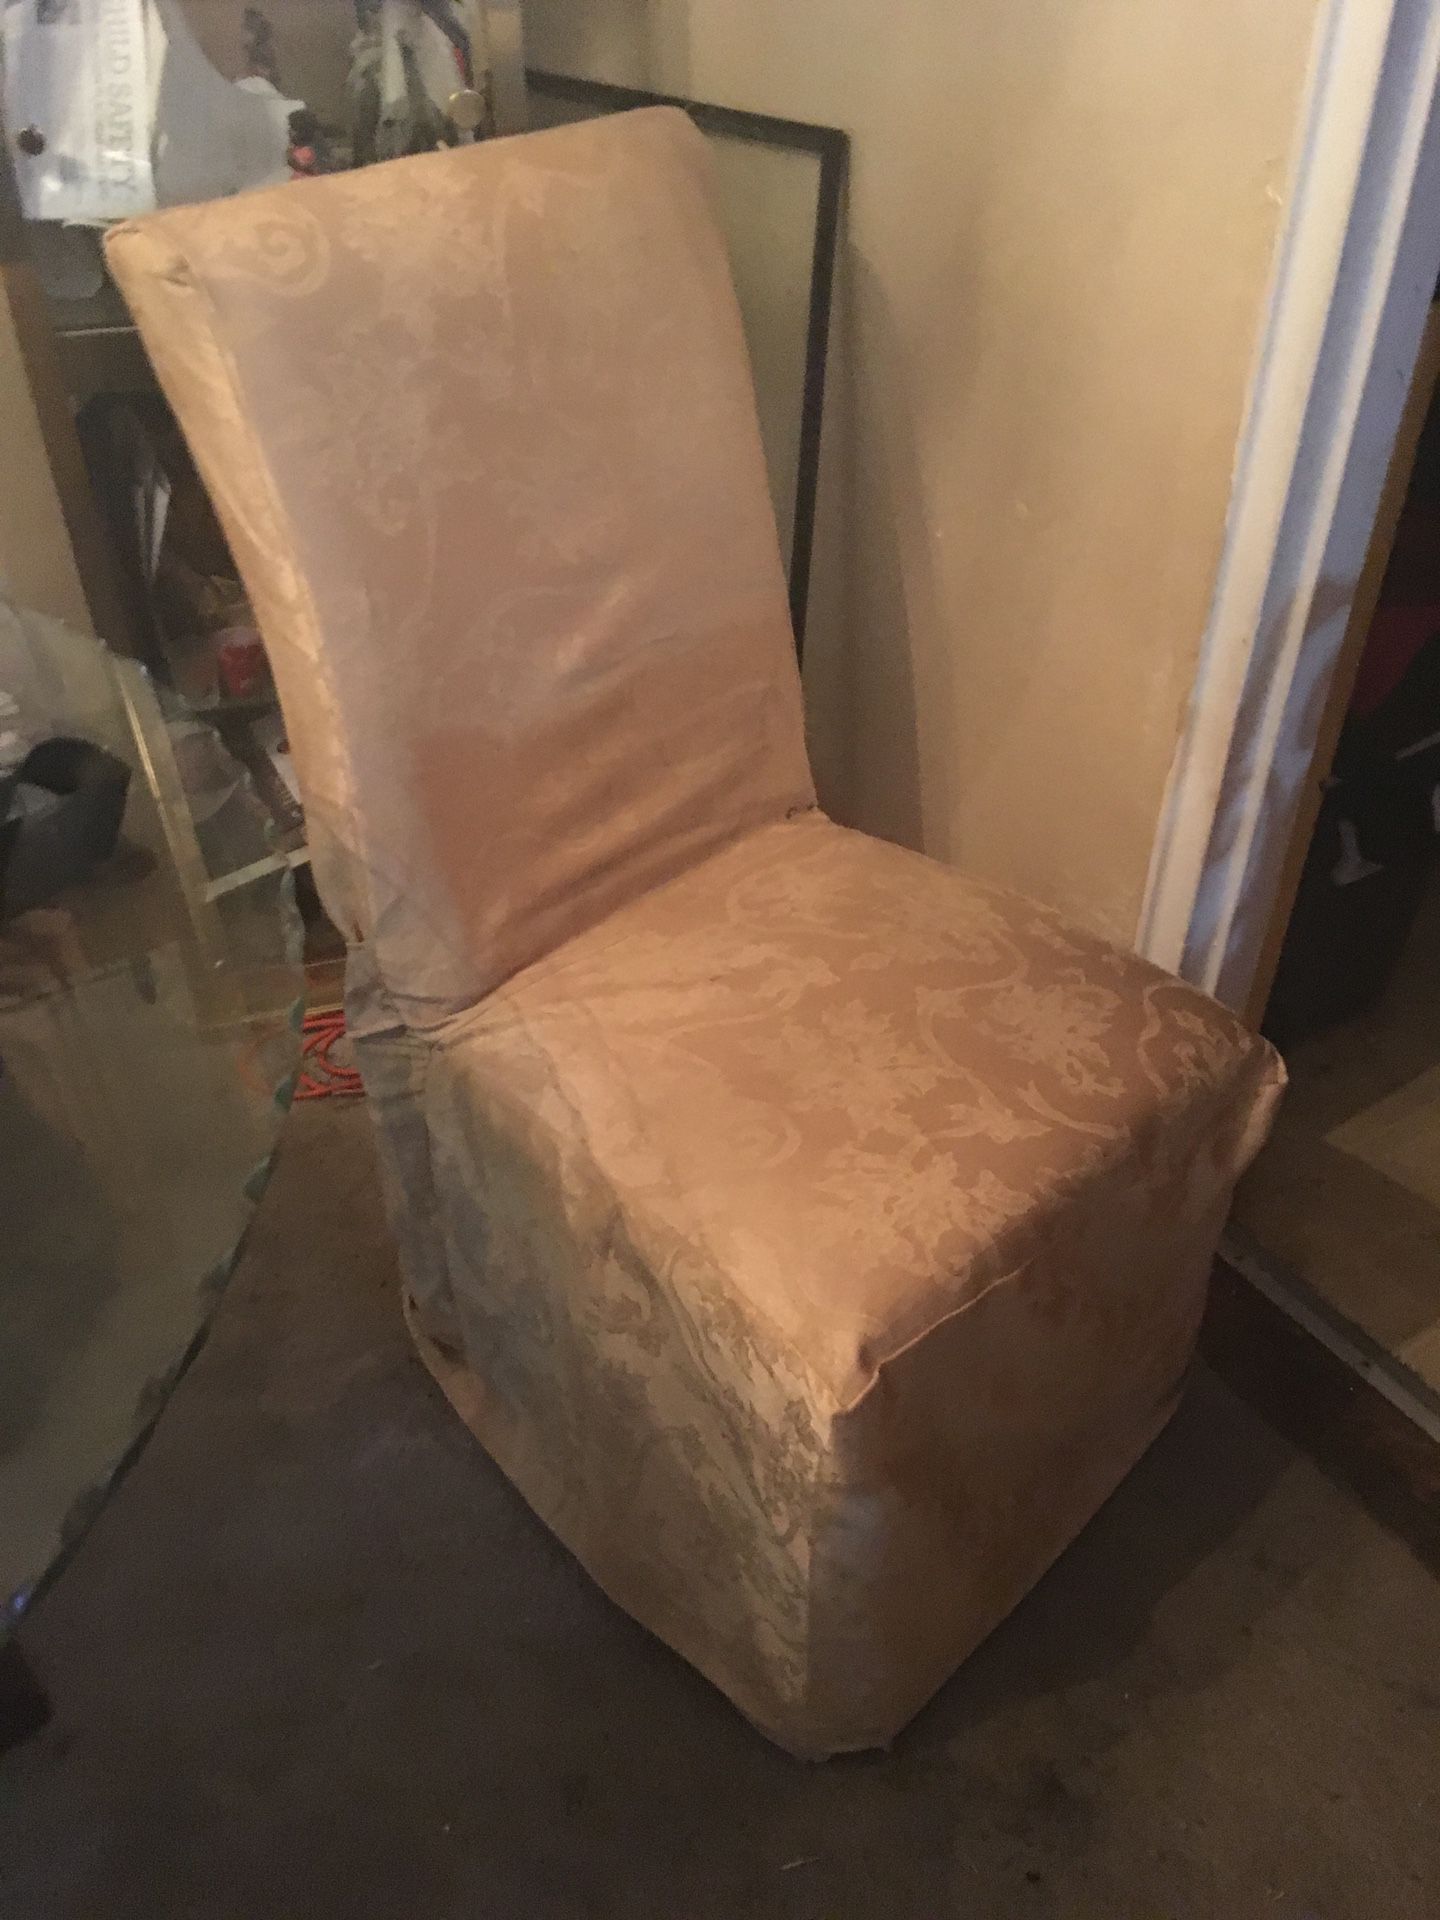 Cream color dining room chairs $150 for 4 chairs comes with gold covers. Thank you!!